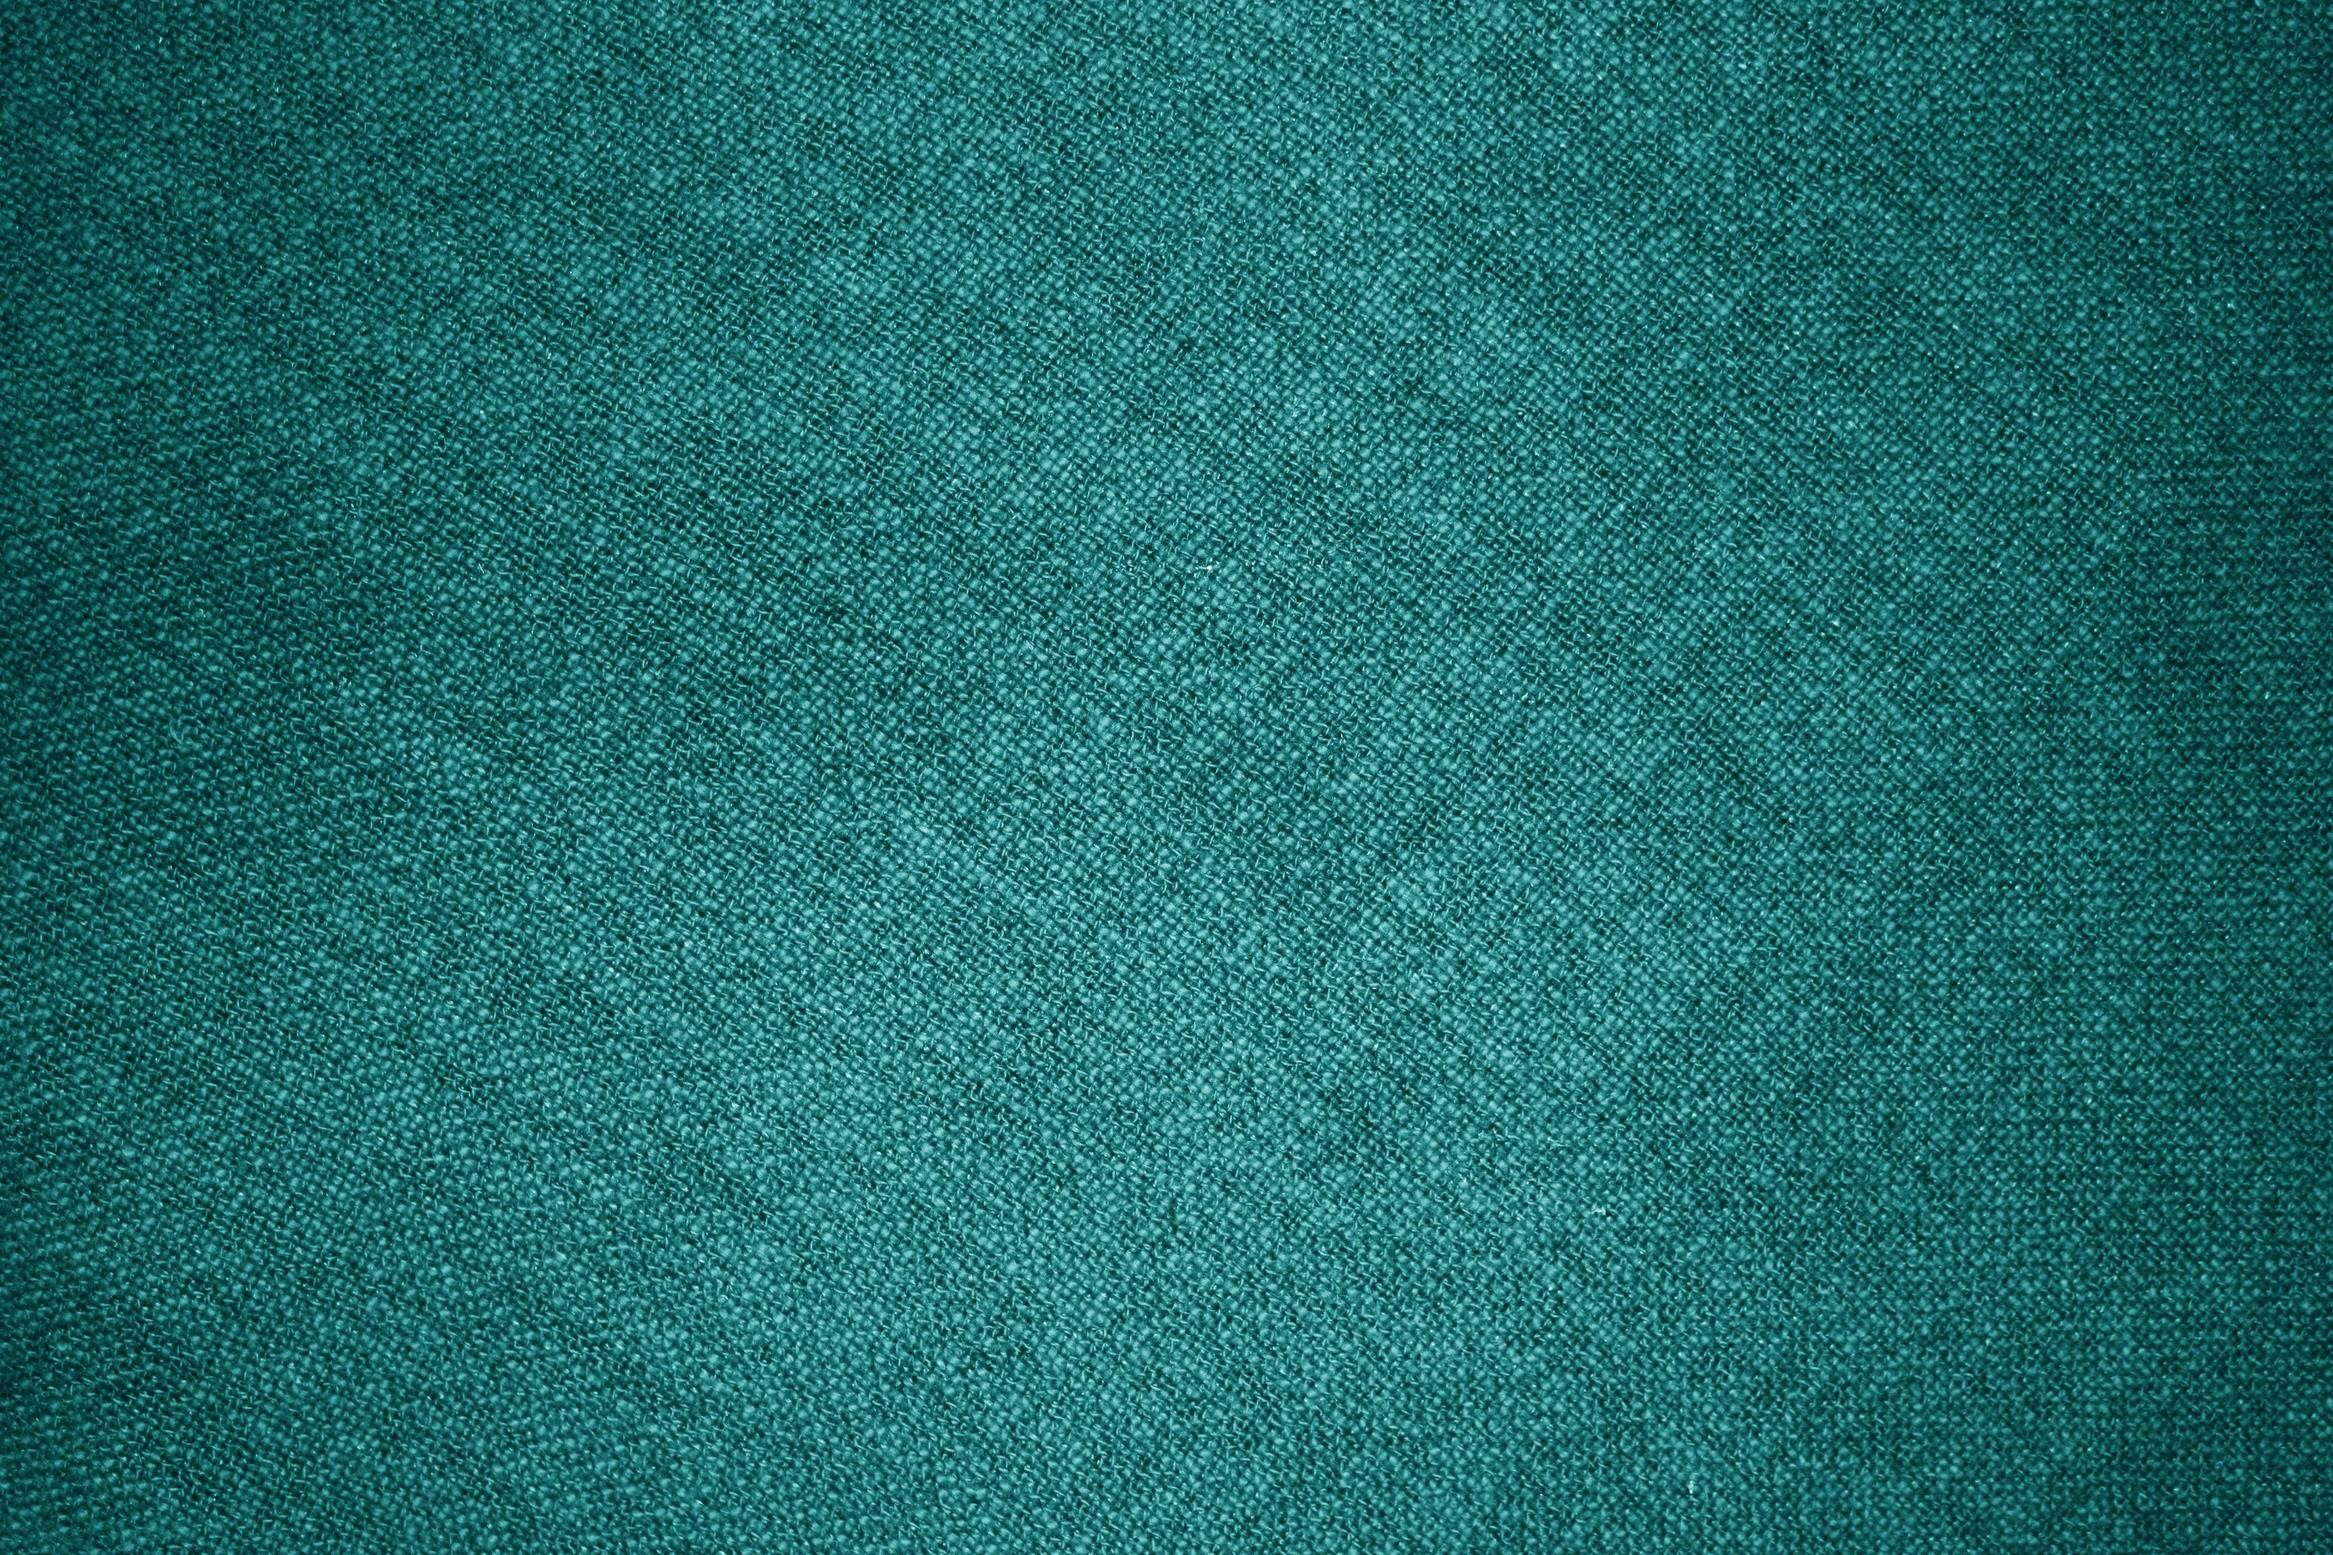 Collection of Teal Widescreen Wallpapers 4327558, px